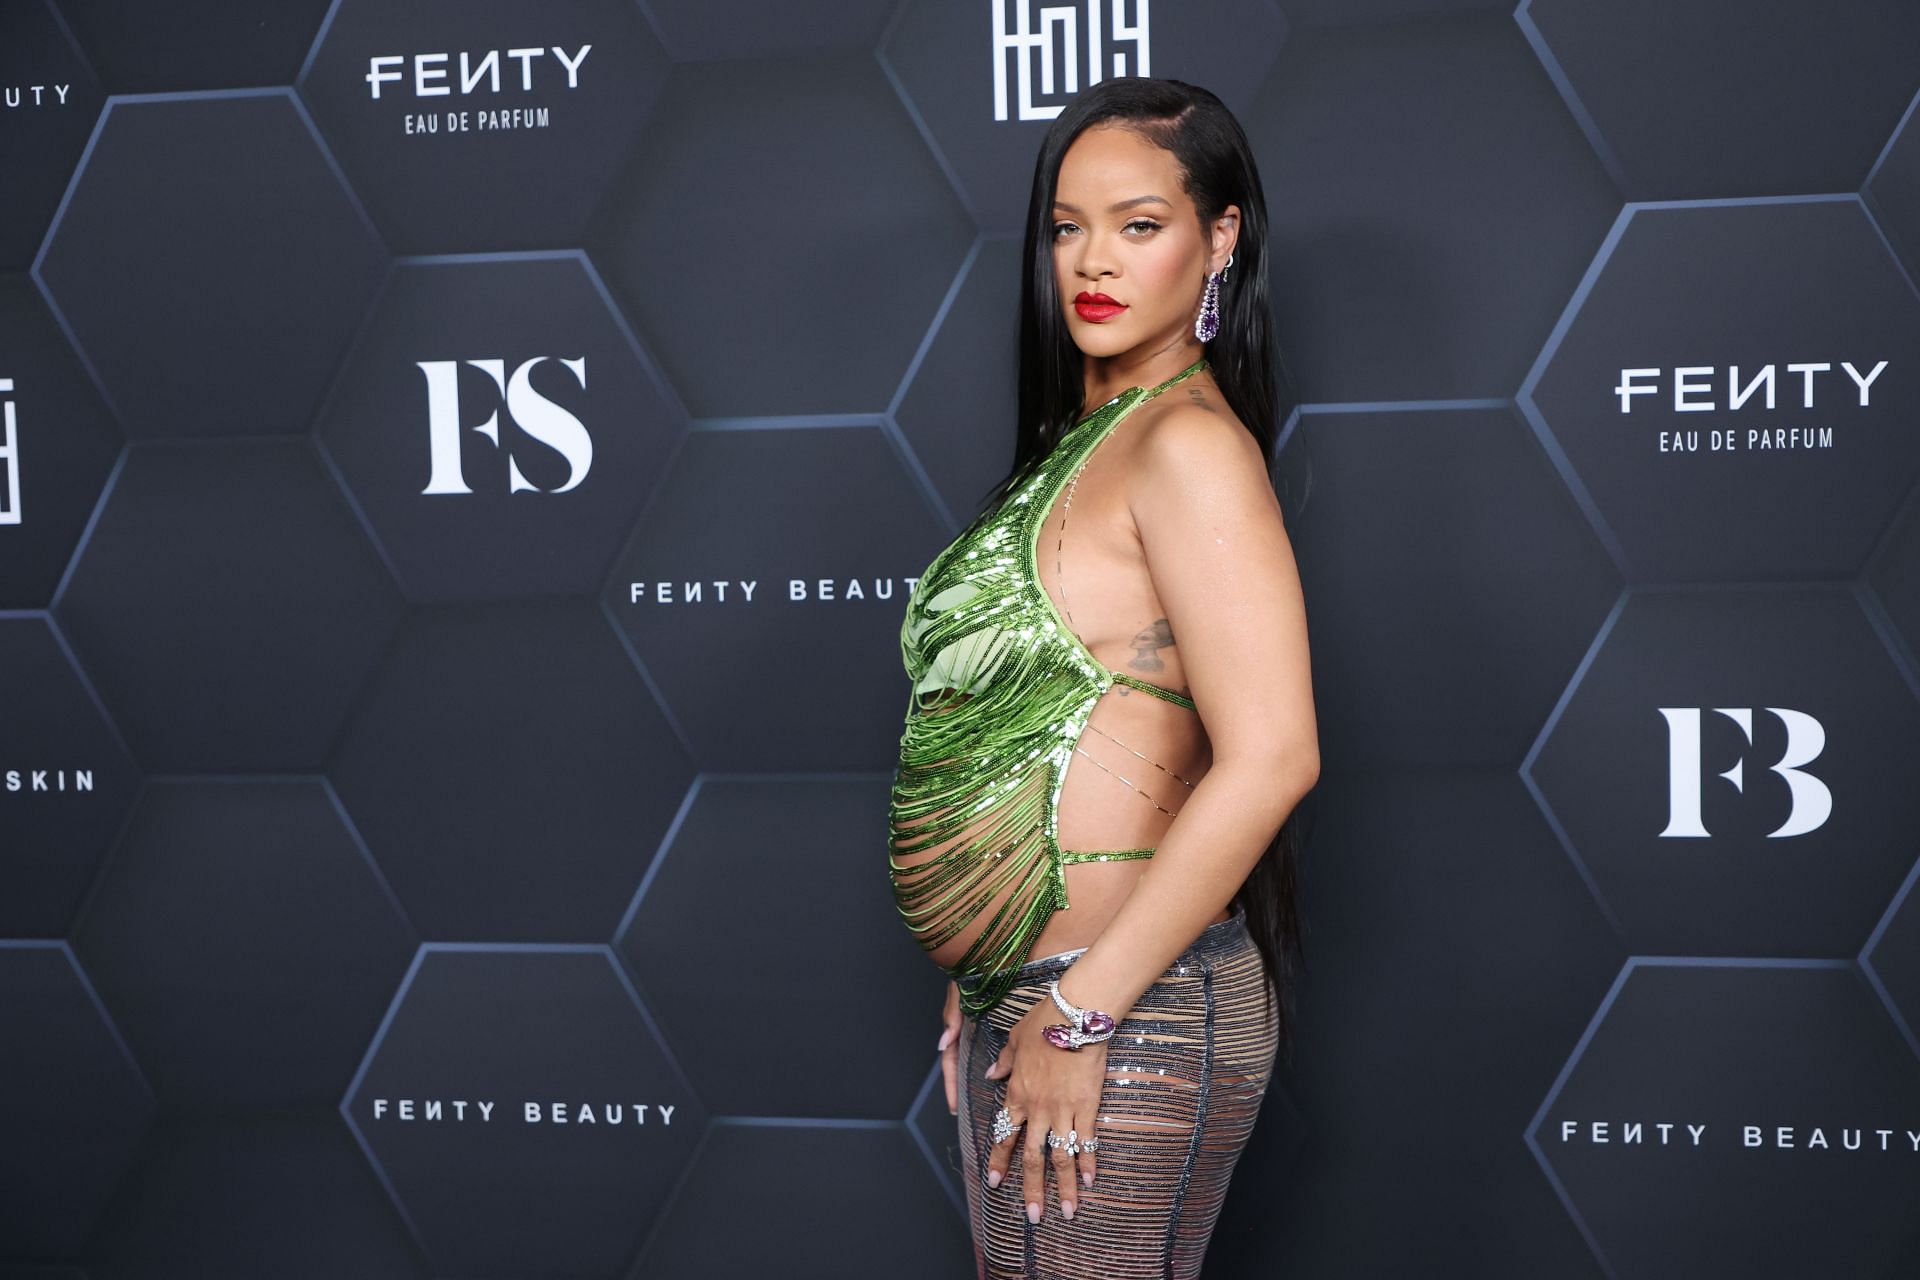 Rihanna flaunting her pregnant body (image via Getty)